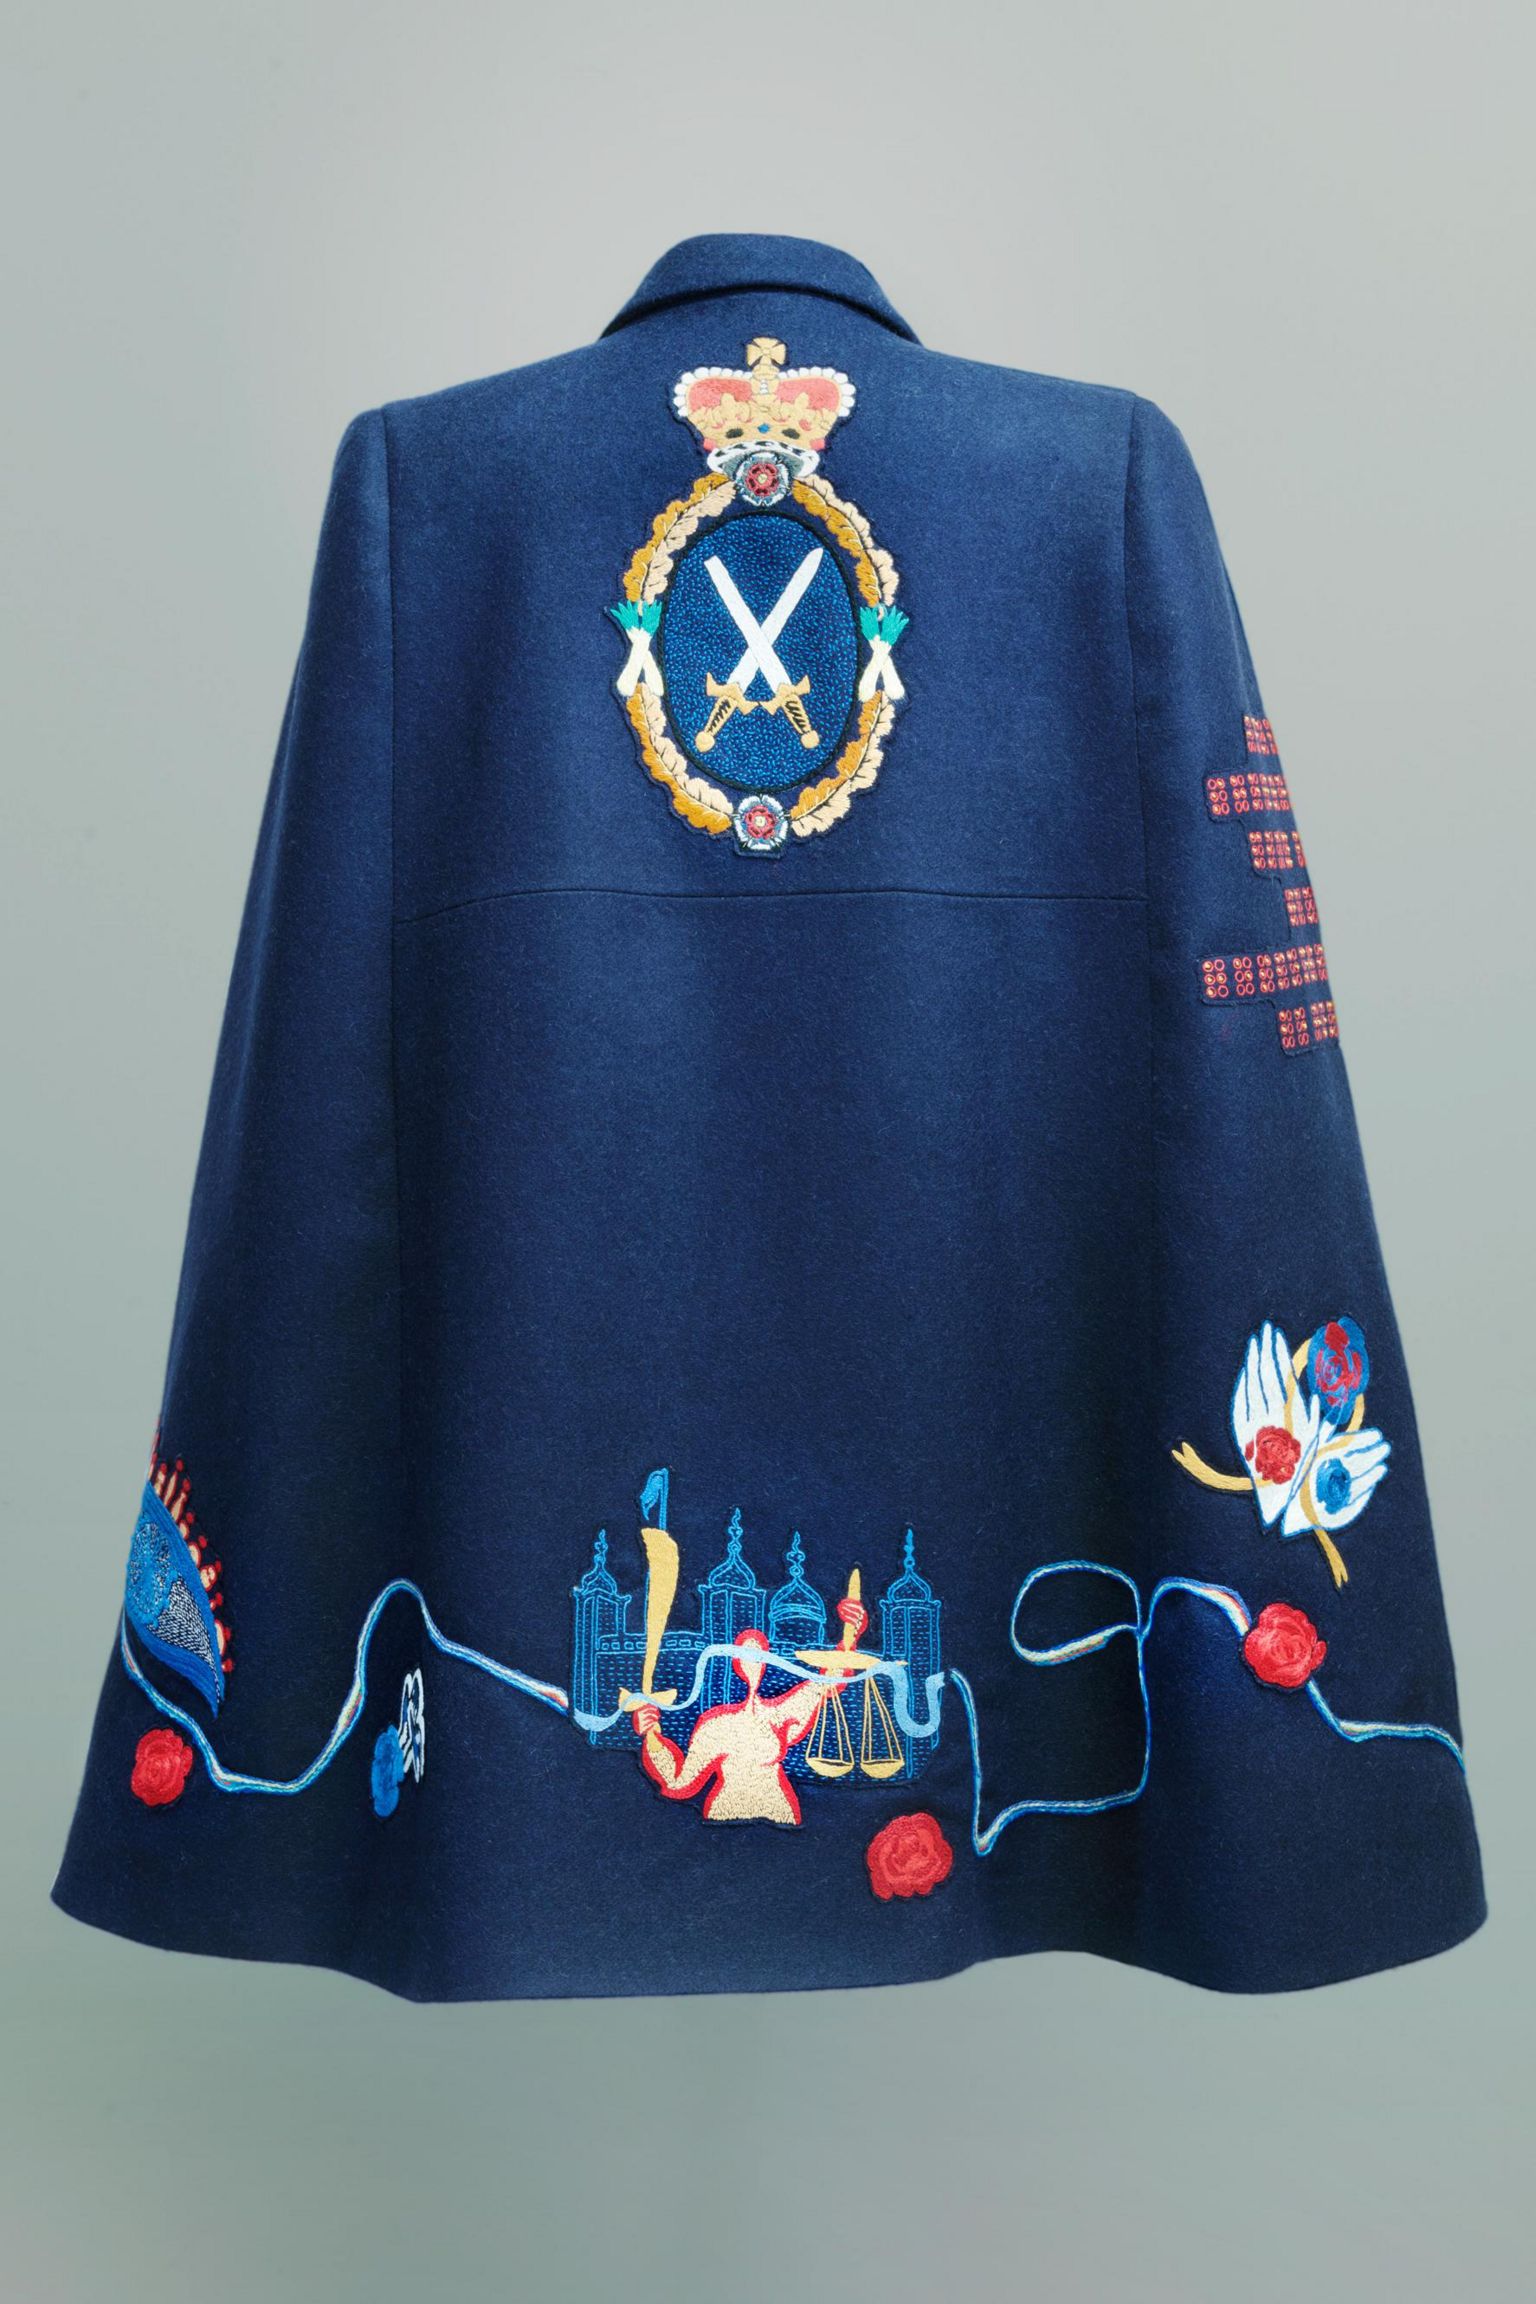 The first garment created for the High Sheriff of Greater London featuring designs from London College of Fashion